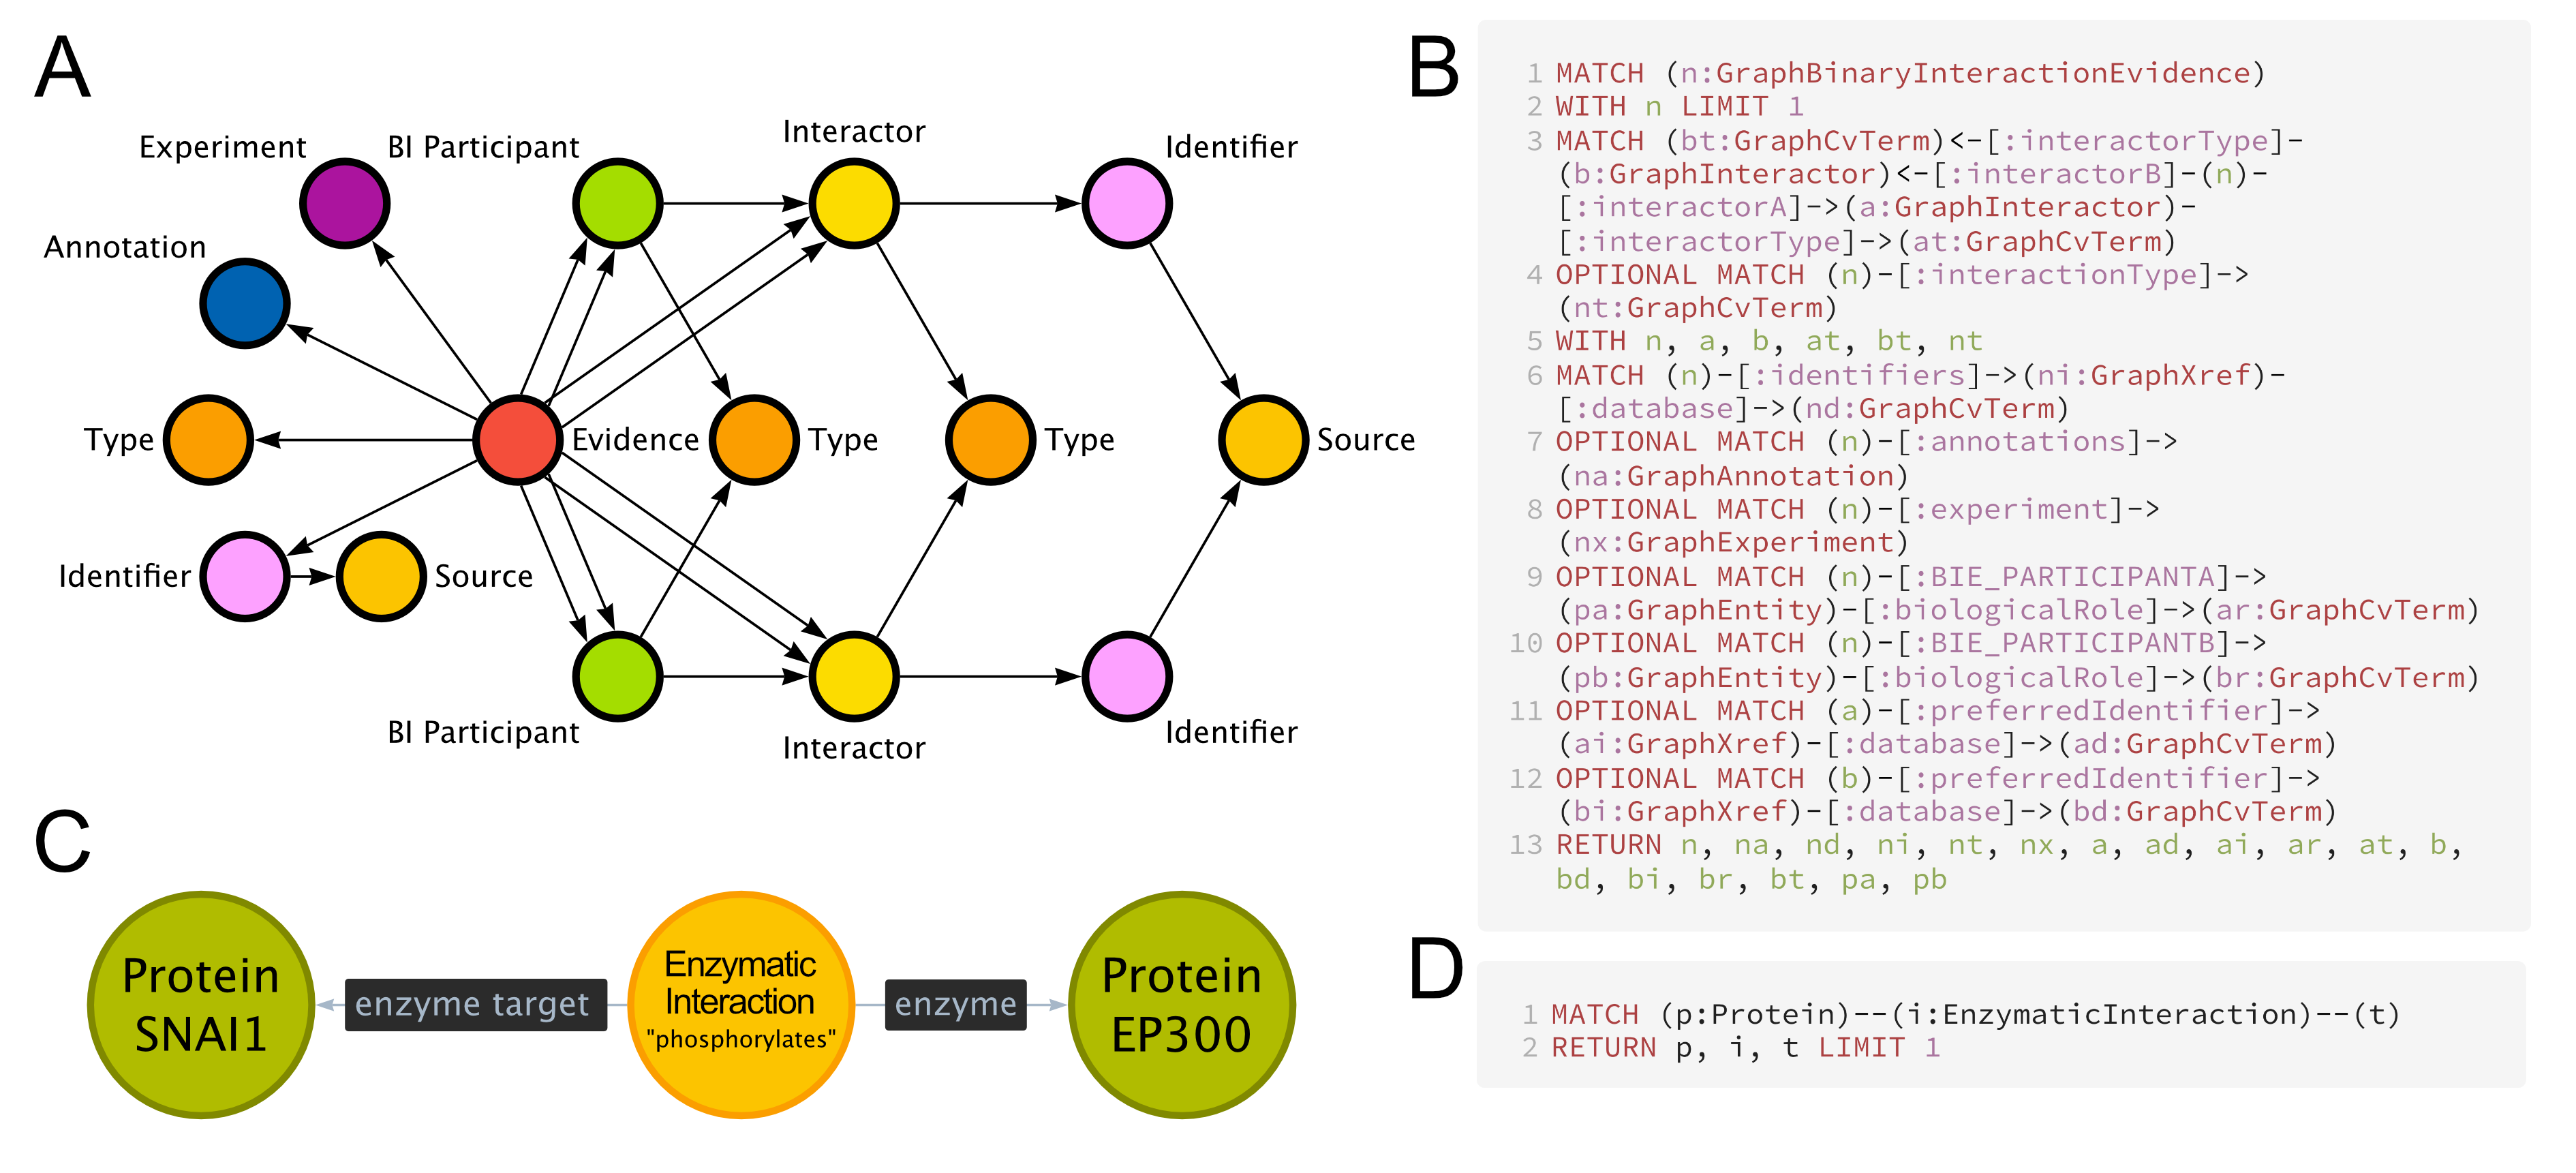 Figure 4: Semantic abstraction. A) The original, “storage-oriented” format used by the OTAR KG, displaying one interaction with additional data. B) The Cypher query to receive one interaction from the OTAR graph. C) The migrated, “task-oriented” format produced by the BioCypher adapter, displaying one interaction. The “additional data” from (A) about experiment and evidence type can be added to the interaction node as a property or encoded in additional nodes connected to the interaction node. D) The Cypher query to receive one interaction from the migrated graph.